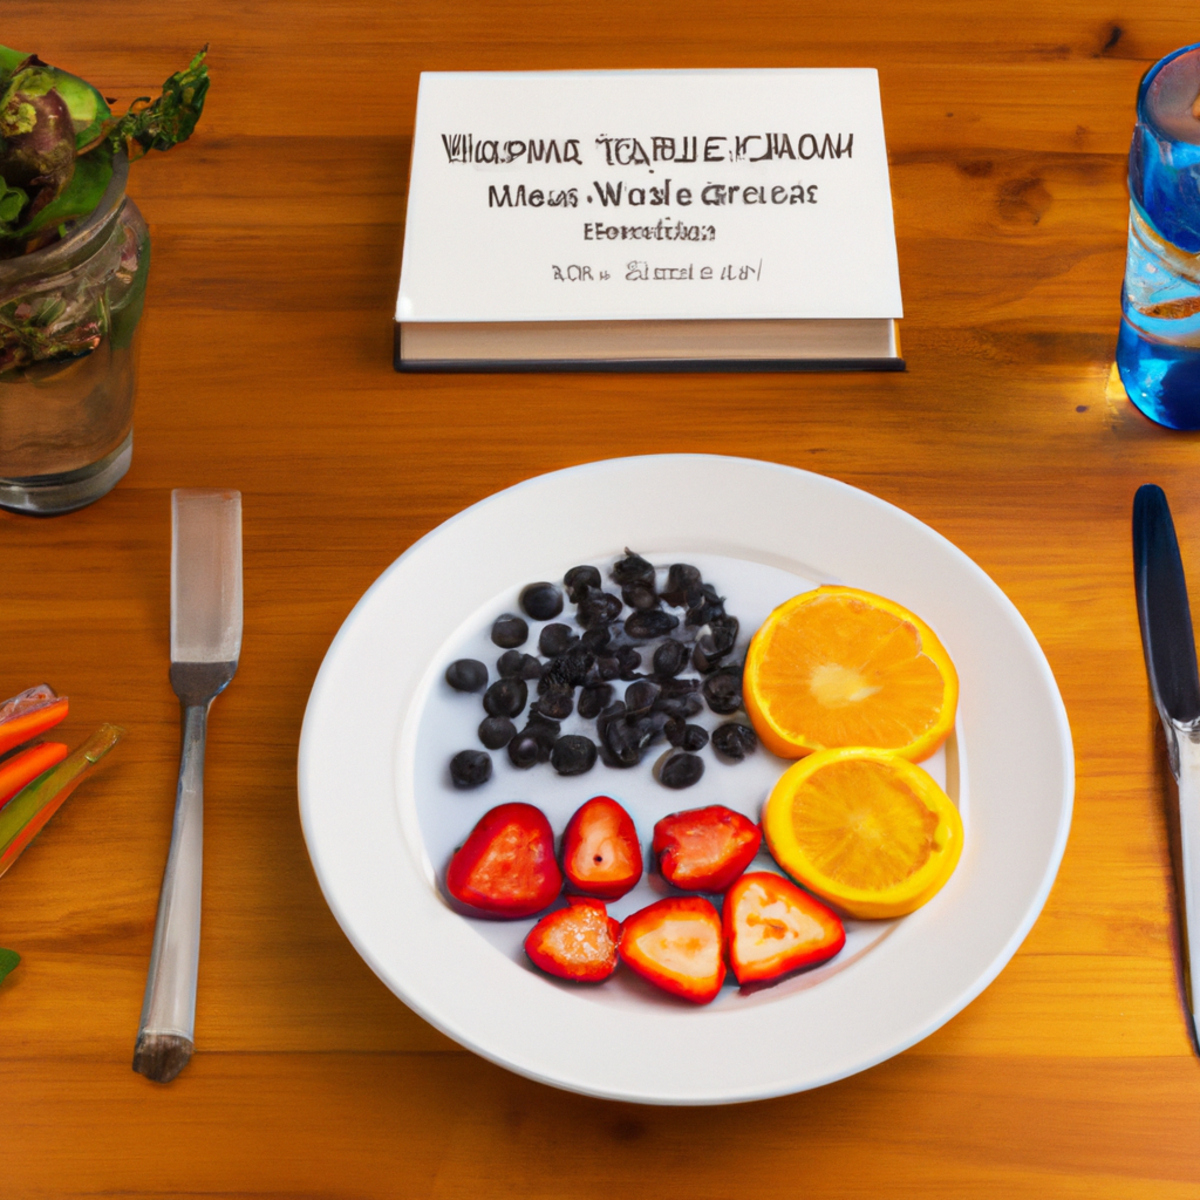 The photo shows a wooden table with a plate of food in the center. The plate contains a colorful assortment of fruits and vegetables, including sliced strawberries, blueberries, and carrots. A glass of water sits next to the plate, with a fork and knife placed neatly on either side. In the background, a book titled "The Science of Intermittent Fasting" is visible, along with a pair of reading glasses. The photo captures the essence of the article, highlighting the importance of healthy eating habits and the benefits of intermittent fasting for brain health.